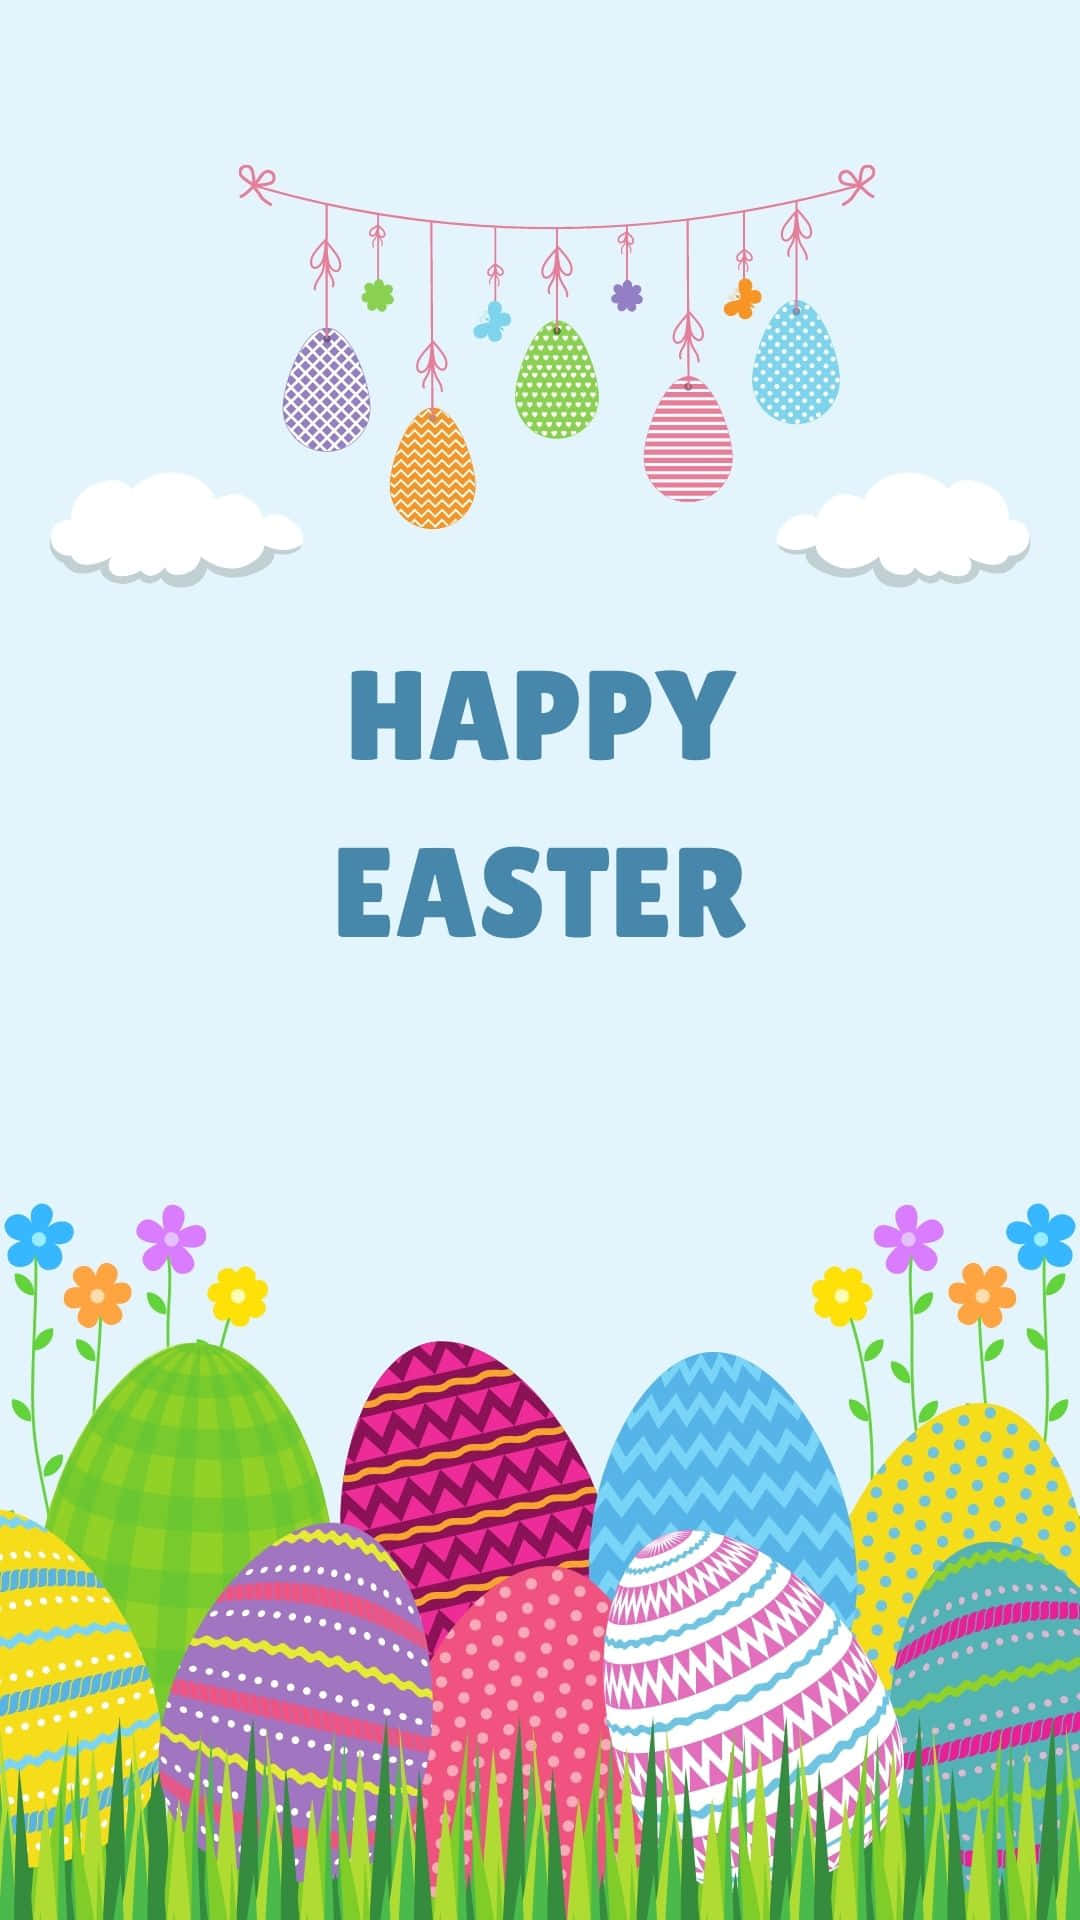 Quirky Easter Egg Background